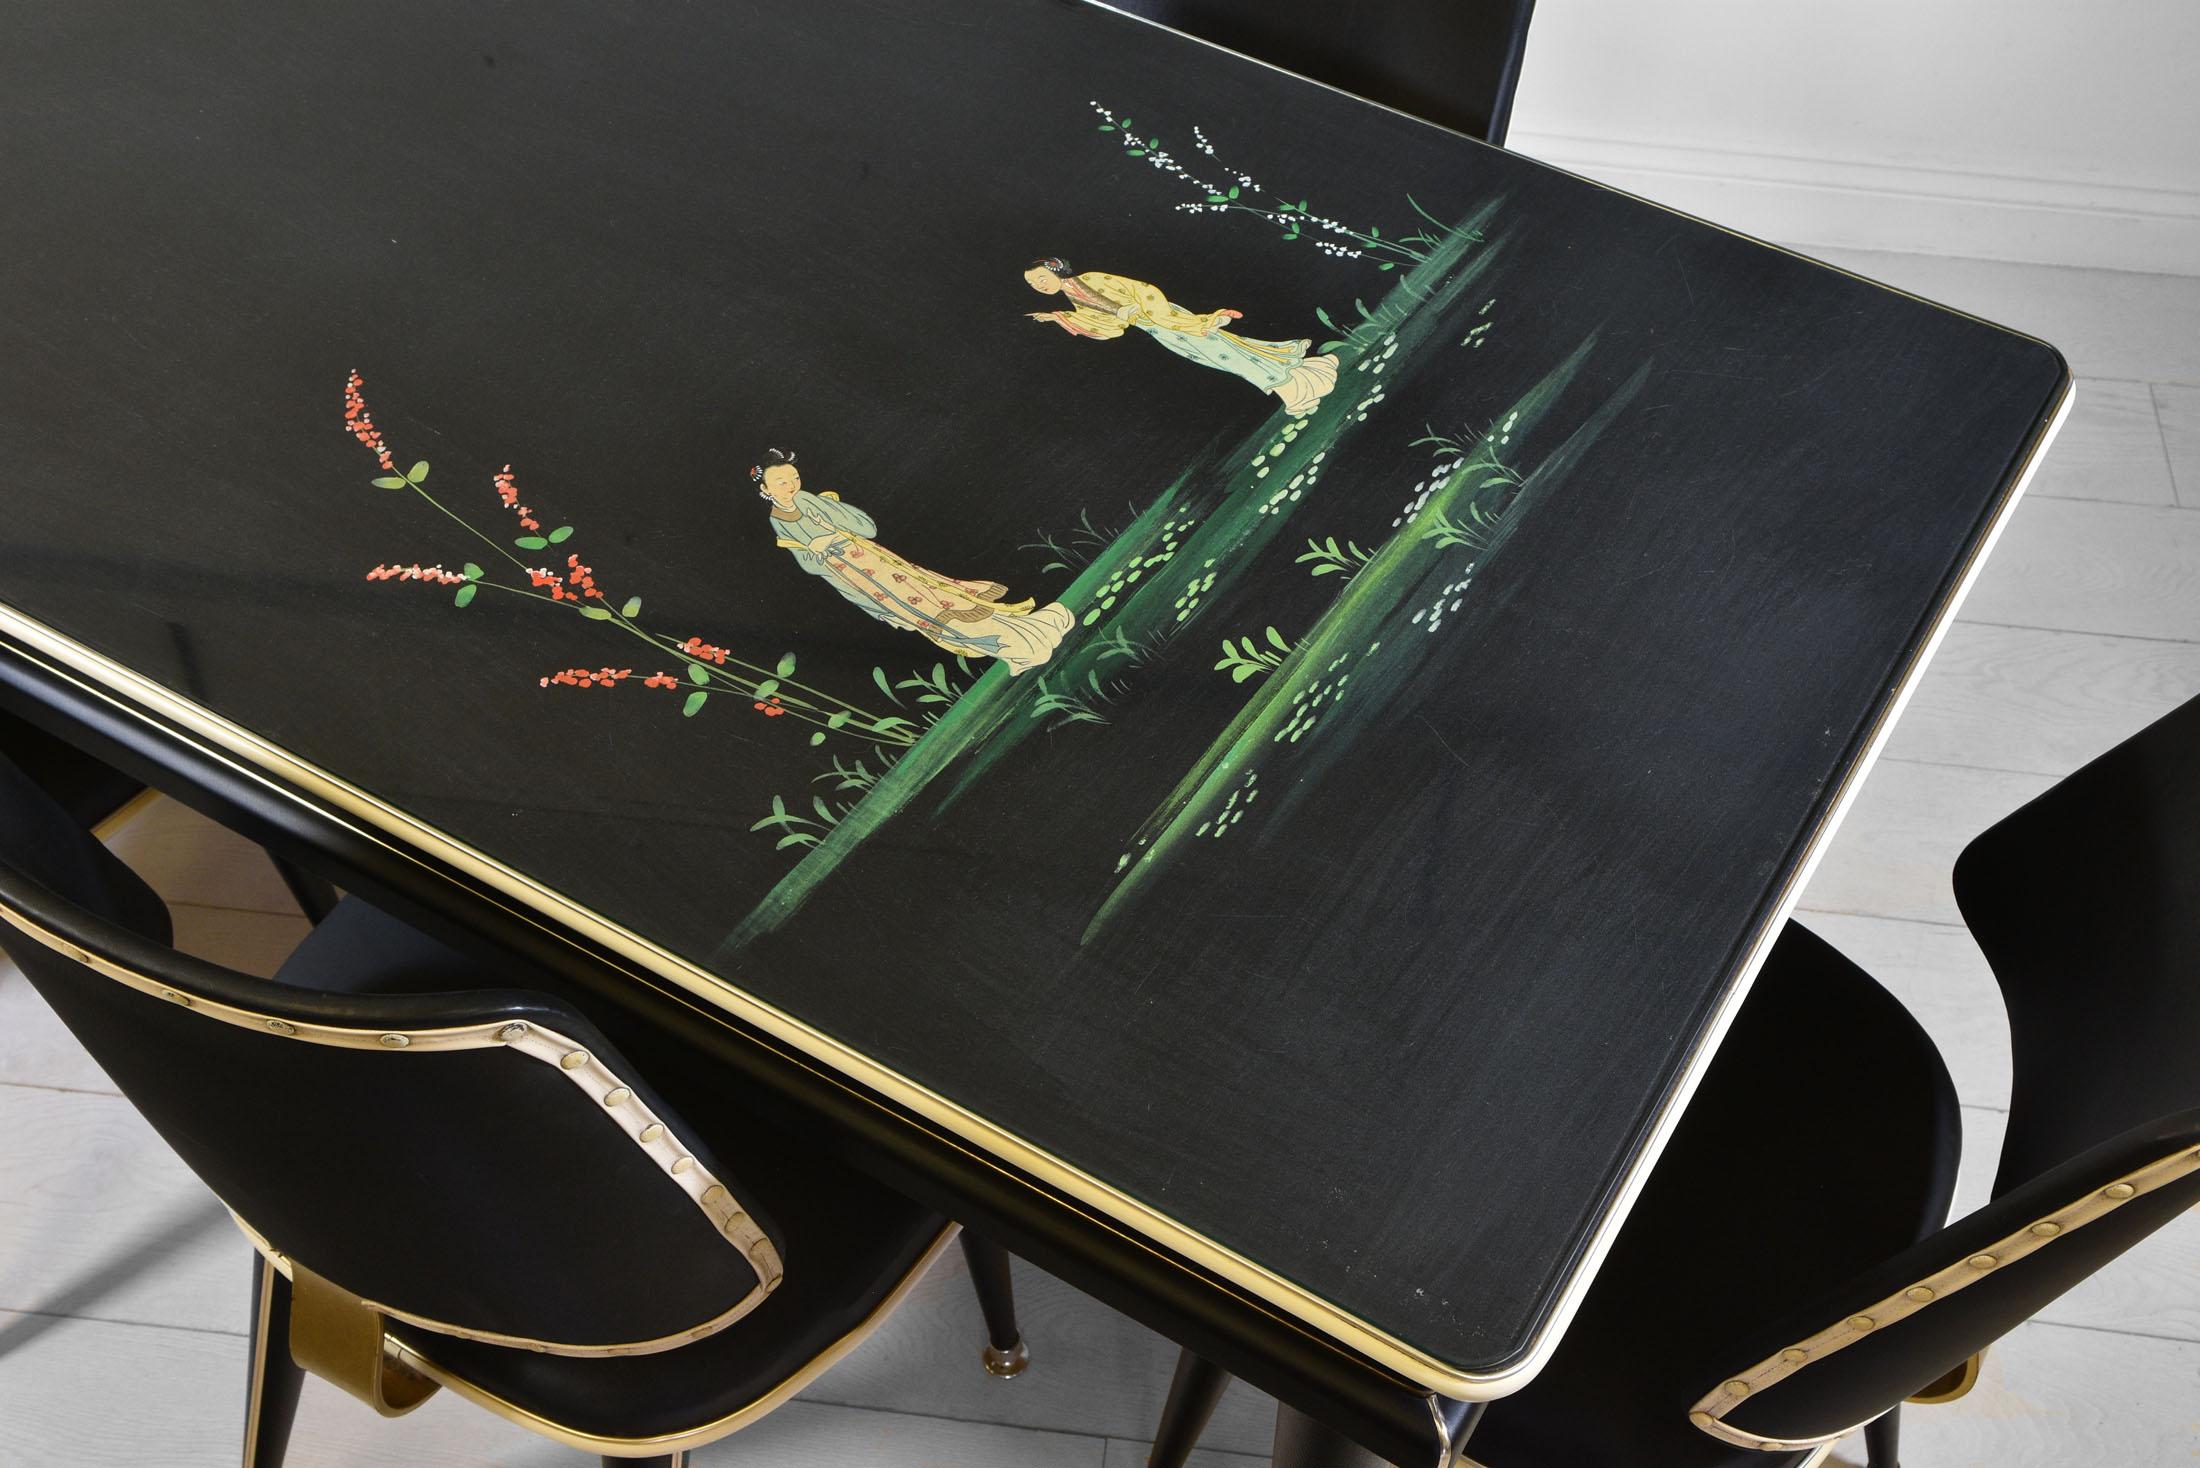 A unique mid-century Italian chinoiserie dining table and six dining chairs, designed by Umberto Mascagni for Harrods. Circa 1960s.

Image numbers 6 and 7 show original photographs of the table and chairs in its first home in the Barbican, London